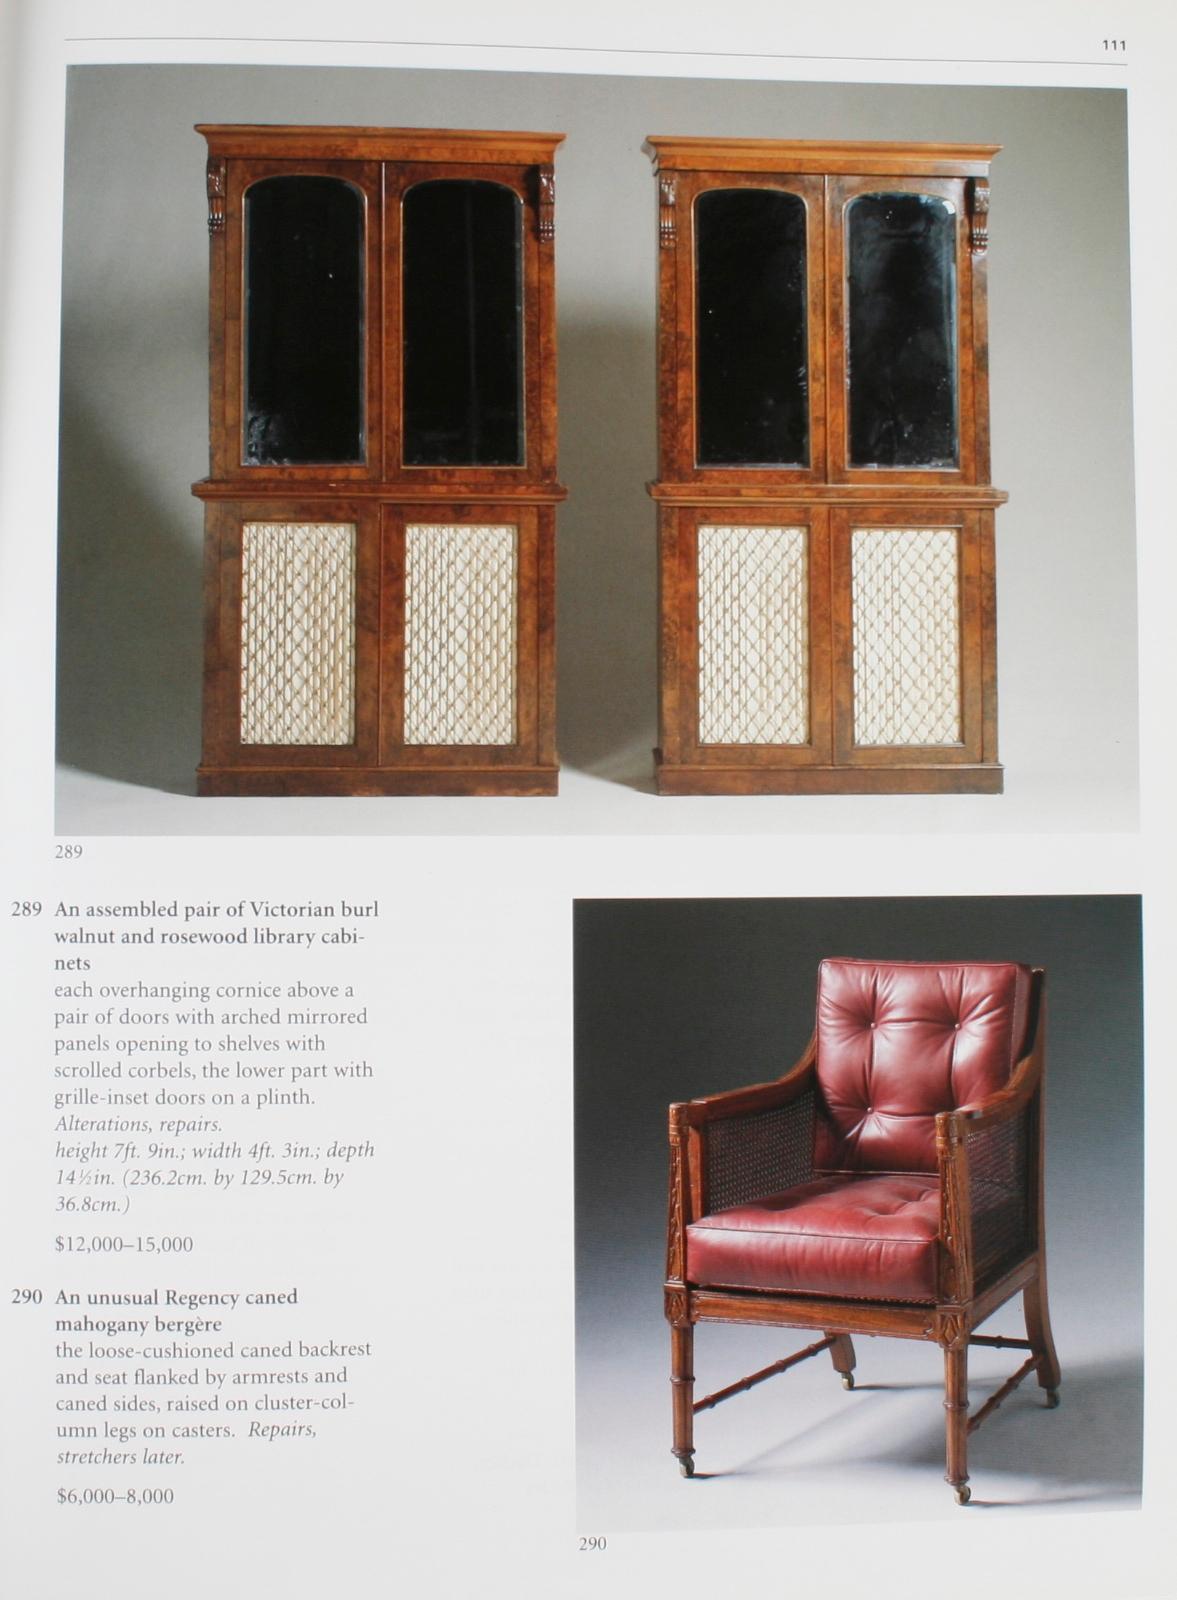 Sotheby's: English Furniture & Decorations, John L. Boonshaft Collection, 1998 4